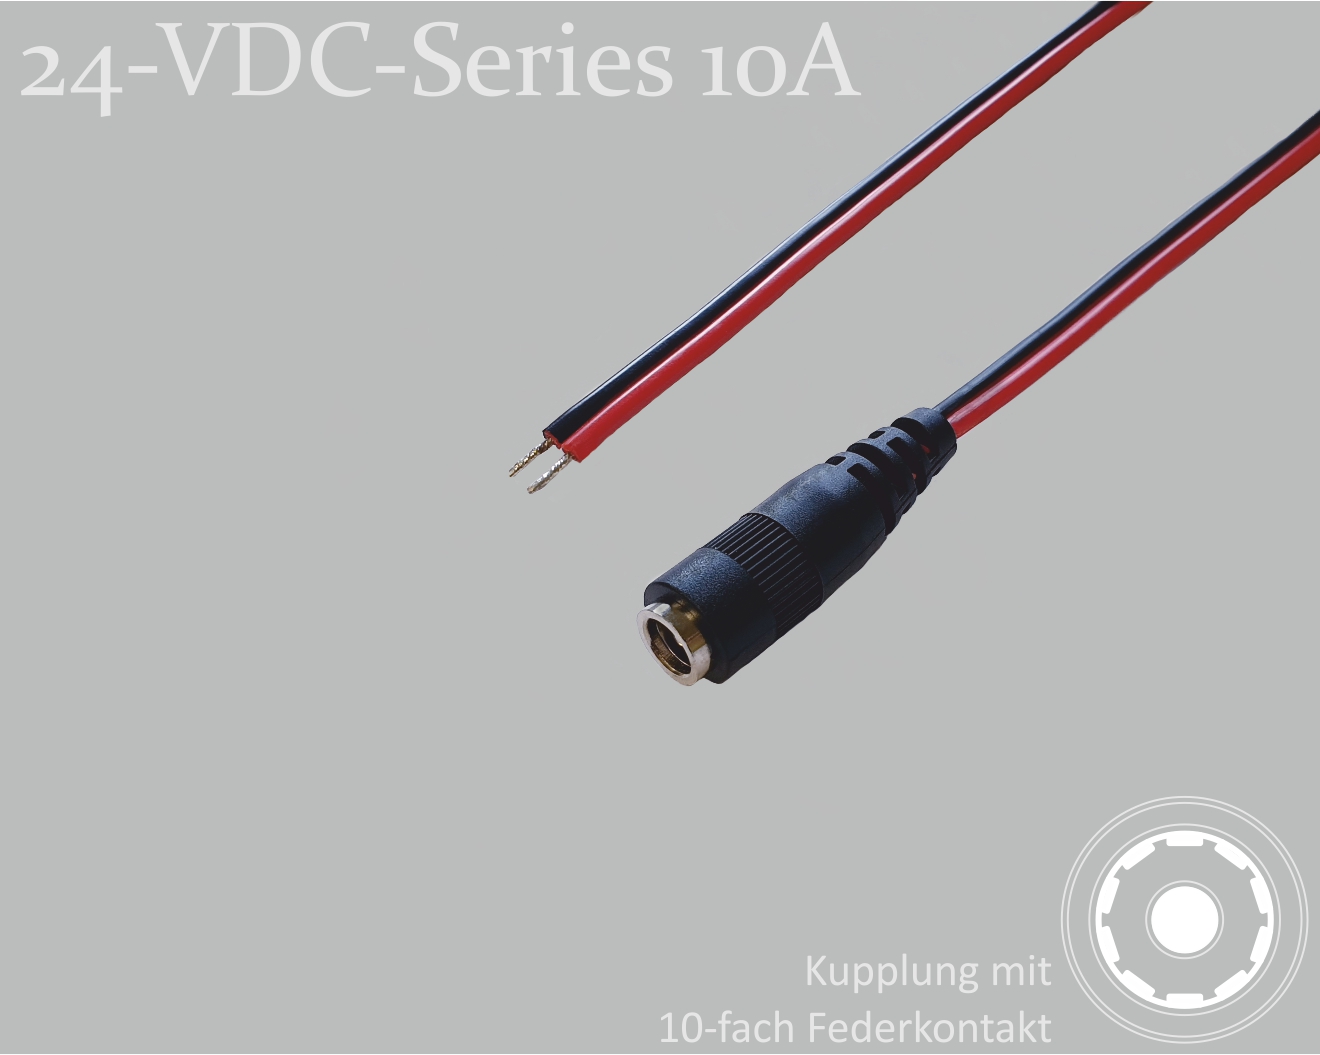 24-VDC-Series 10A, DC connection cable, DC coupling with 10-spring contact 2.1x5.5mm, flat cable 2x0.75mm², red/black, tinned ends, 0.75m